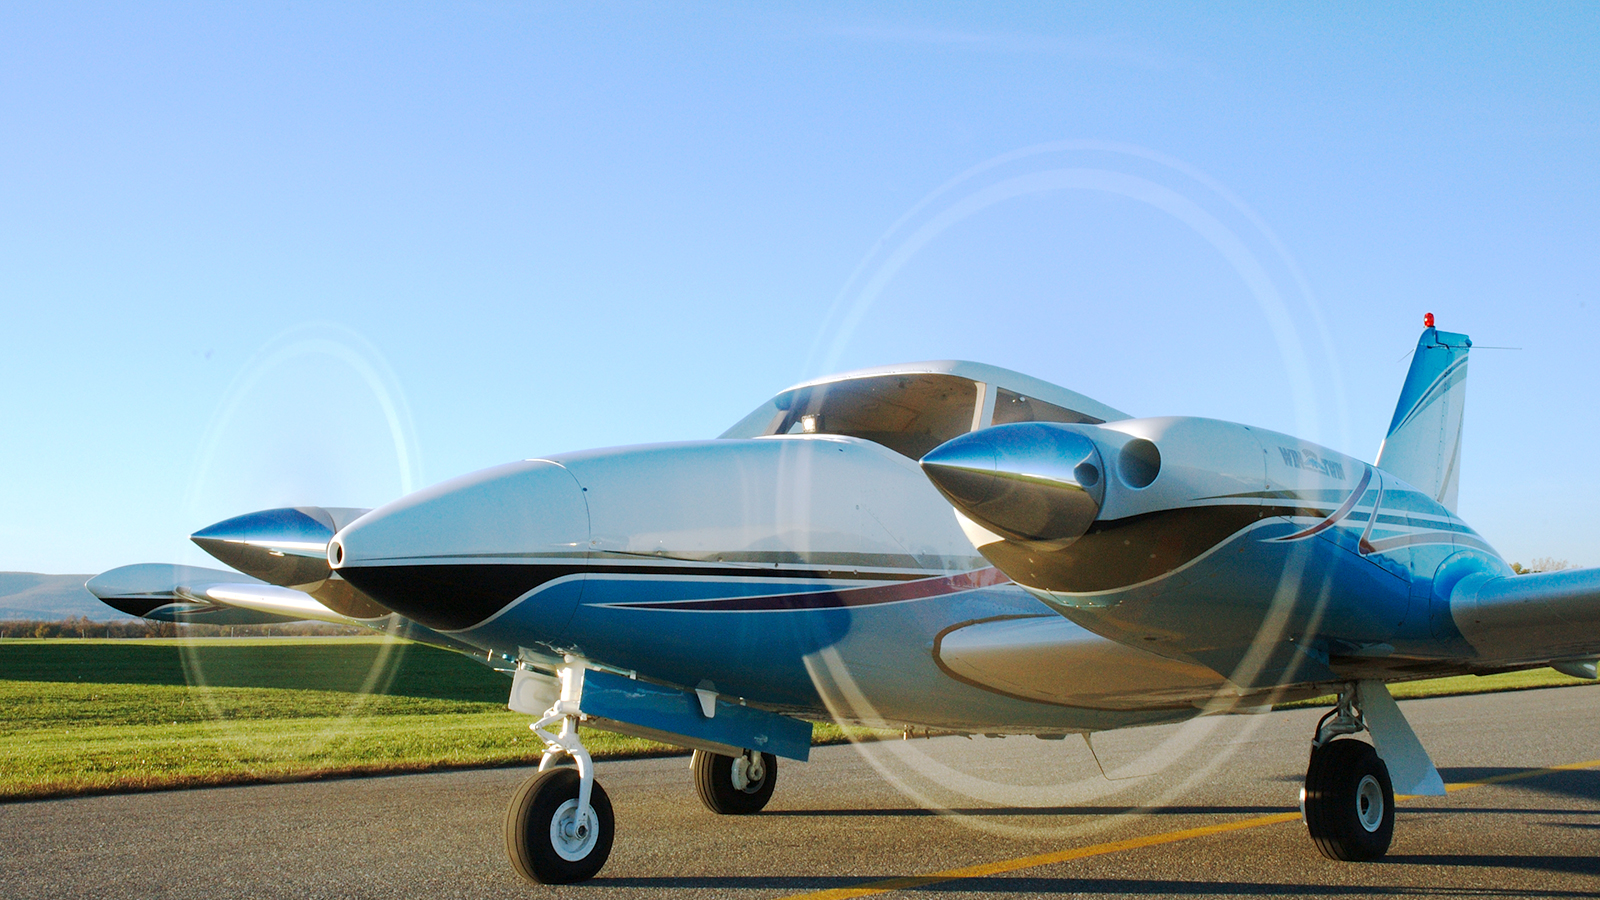 Taming the Twin: Four Rules for Safe Multiengine Flying